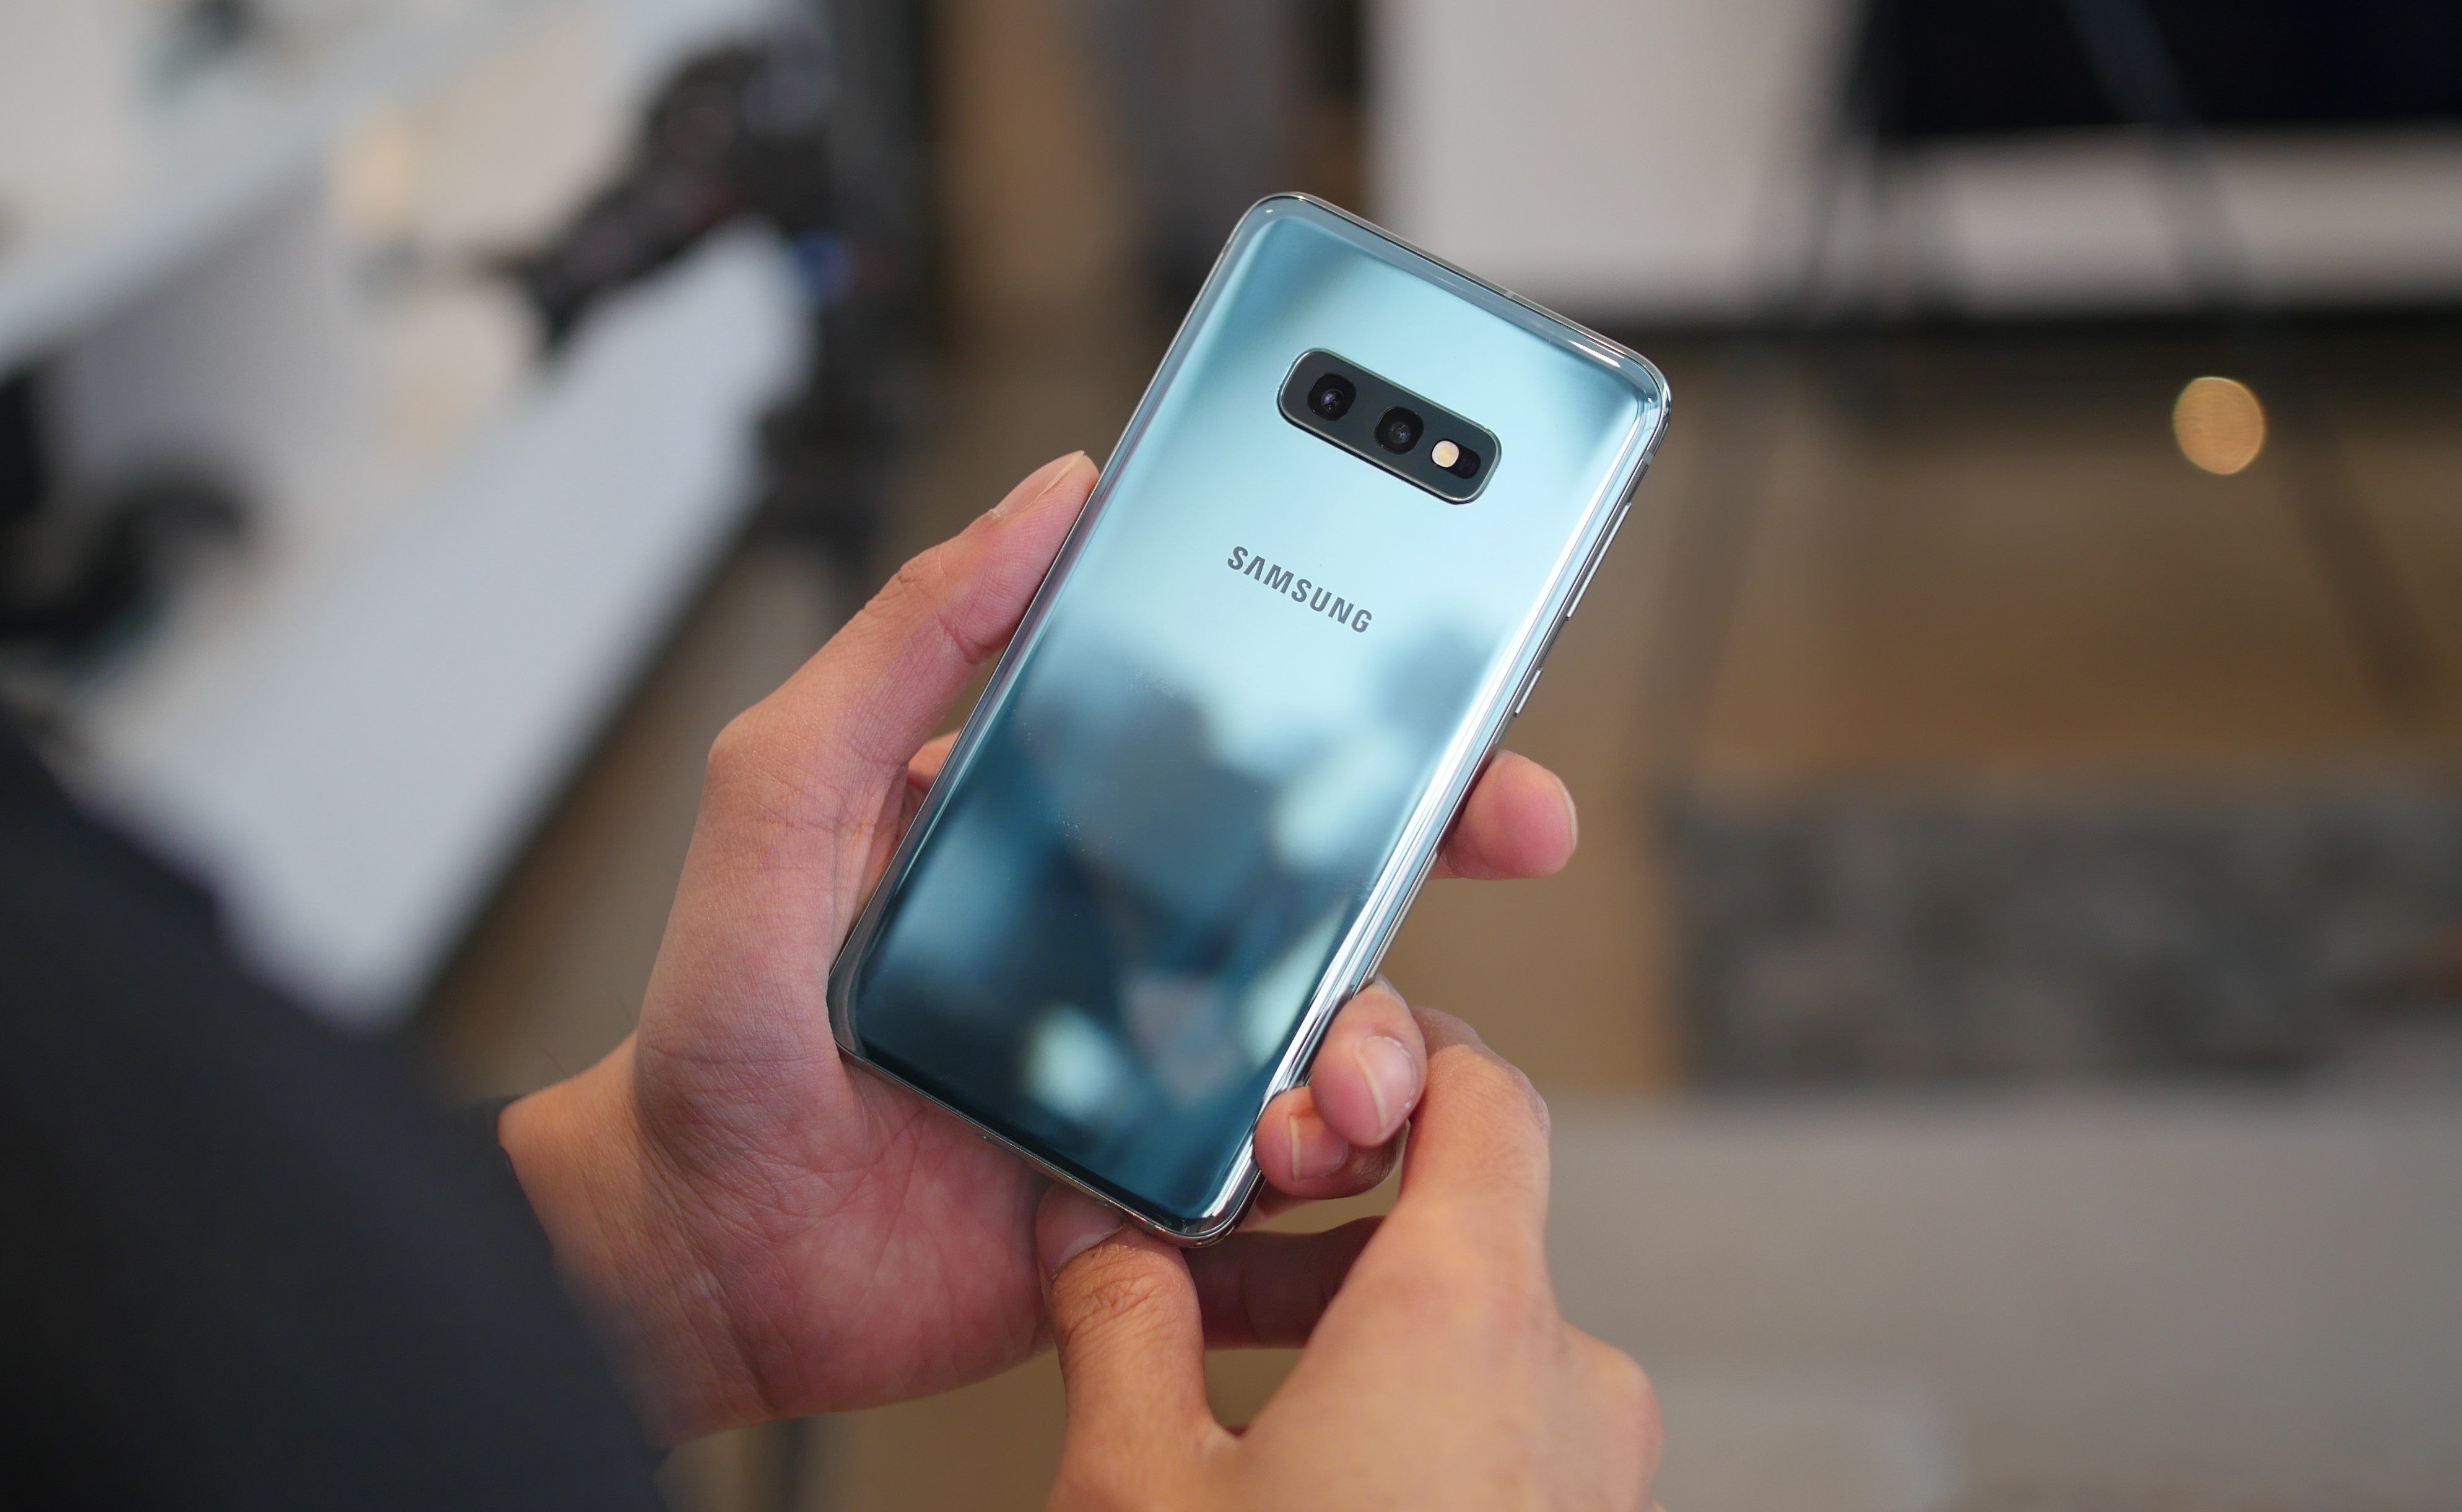 The new Samsung Galaxy S10, S10+, S10e, S10 5G smartphones are official, here's everything you need to know!